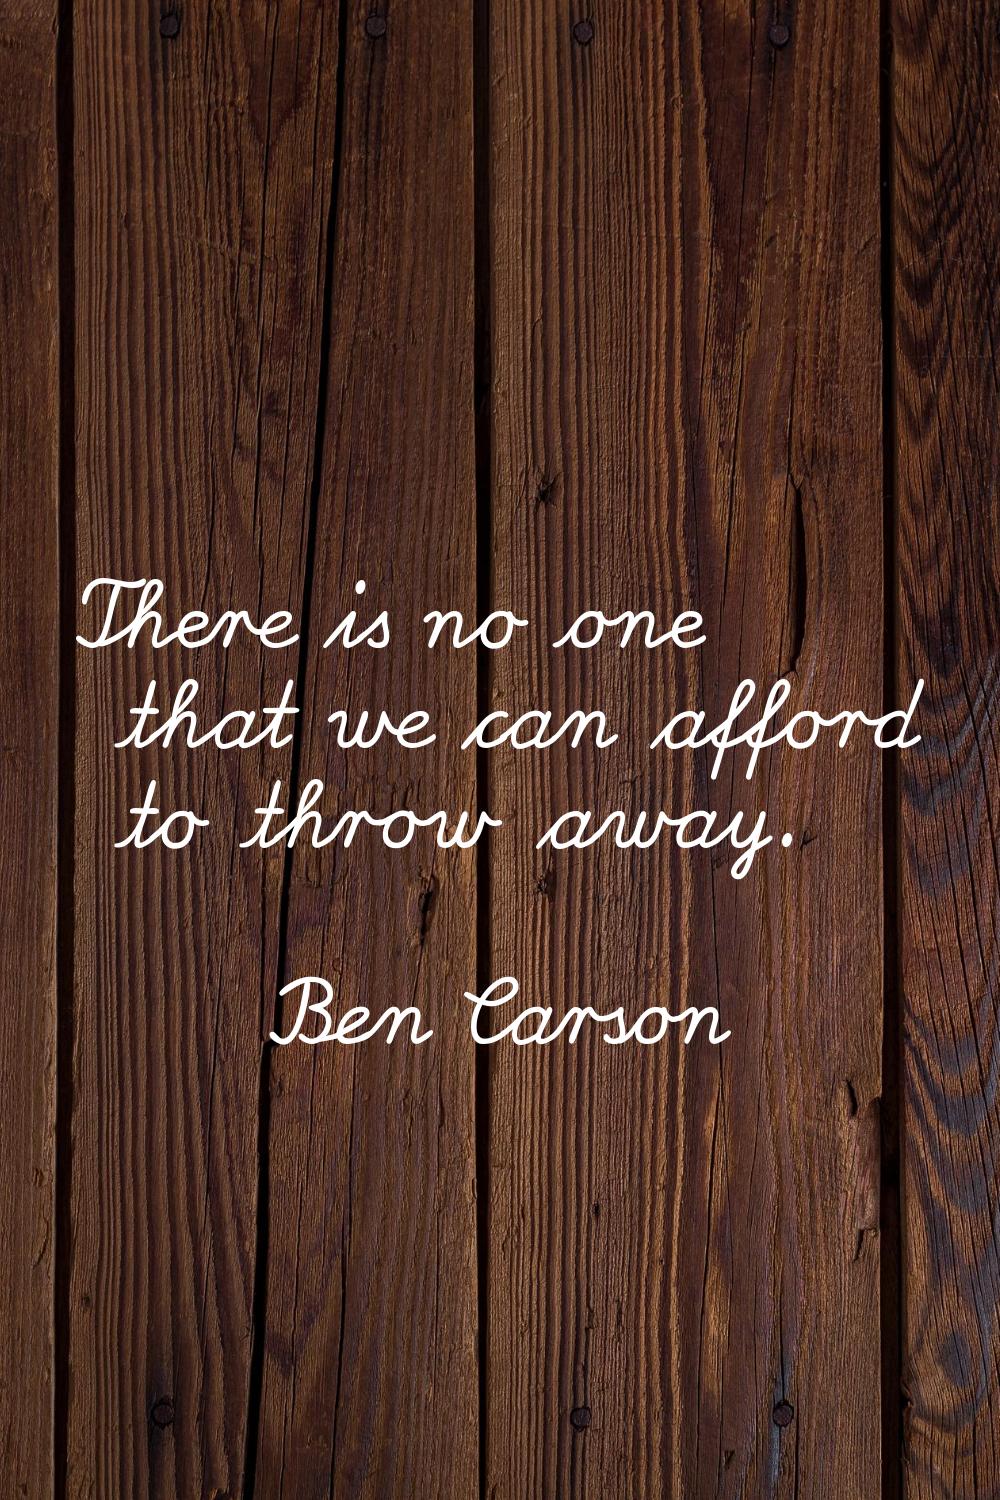 There is no one that we can afford to throw away.